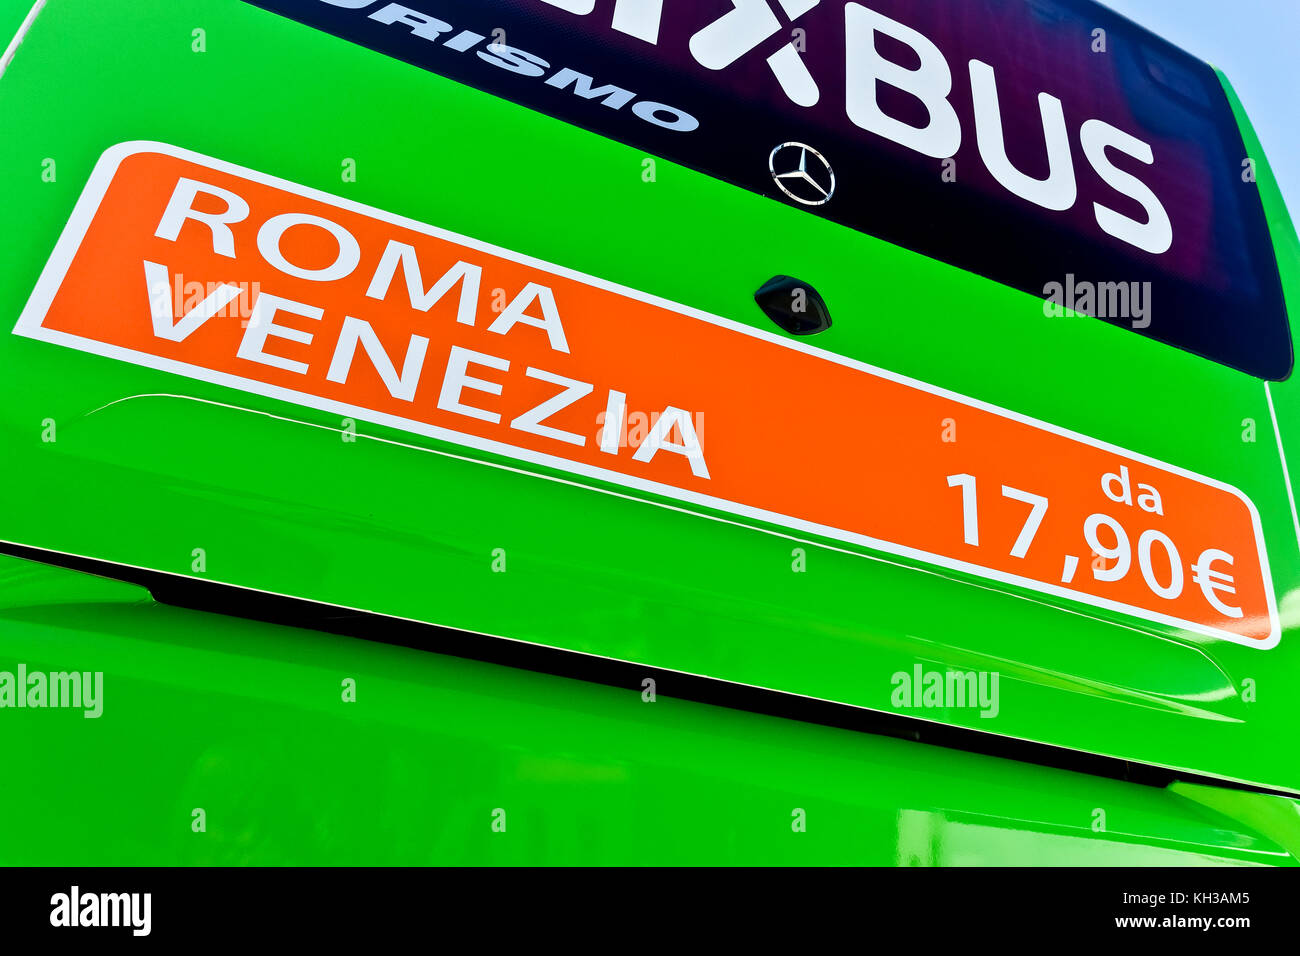 Low-cost bus transportation. Advertisement on rear FlixBus coach advertising low fare from Rome to Venice. Intercity bus service in Europe. Stock Photo